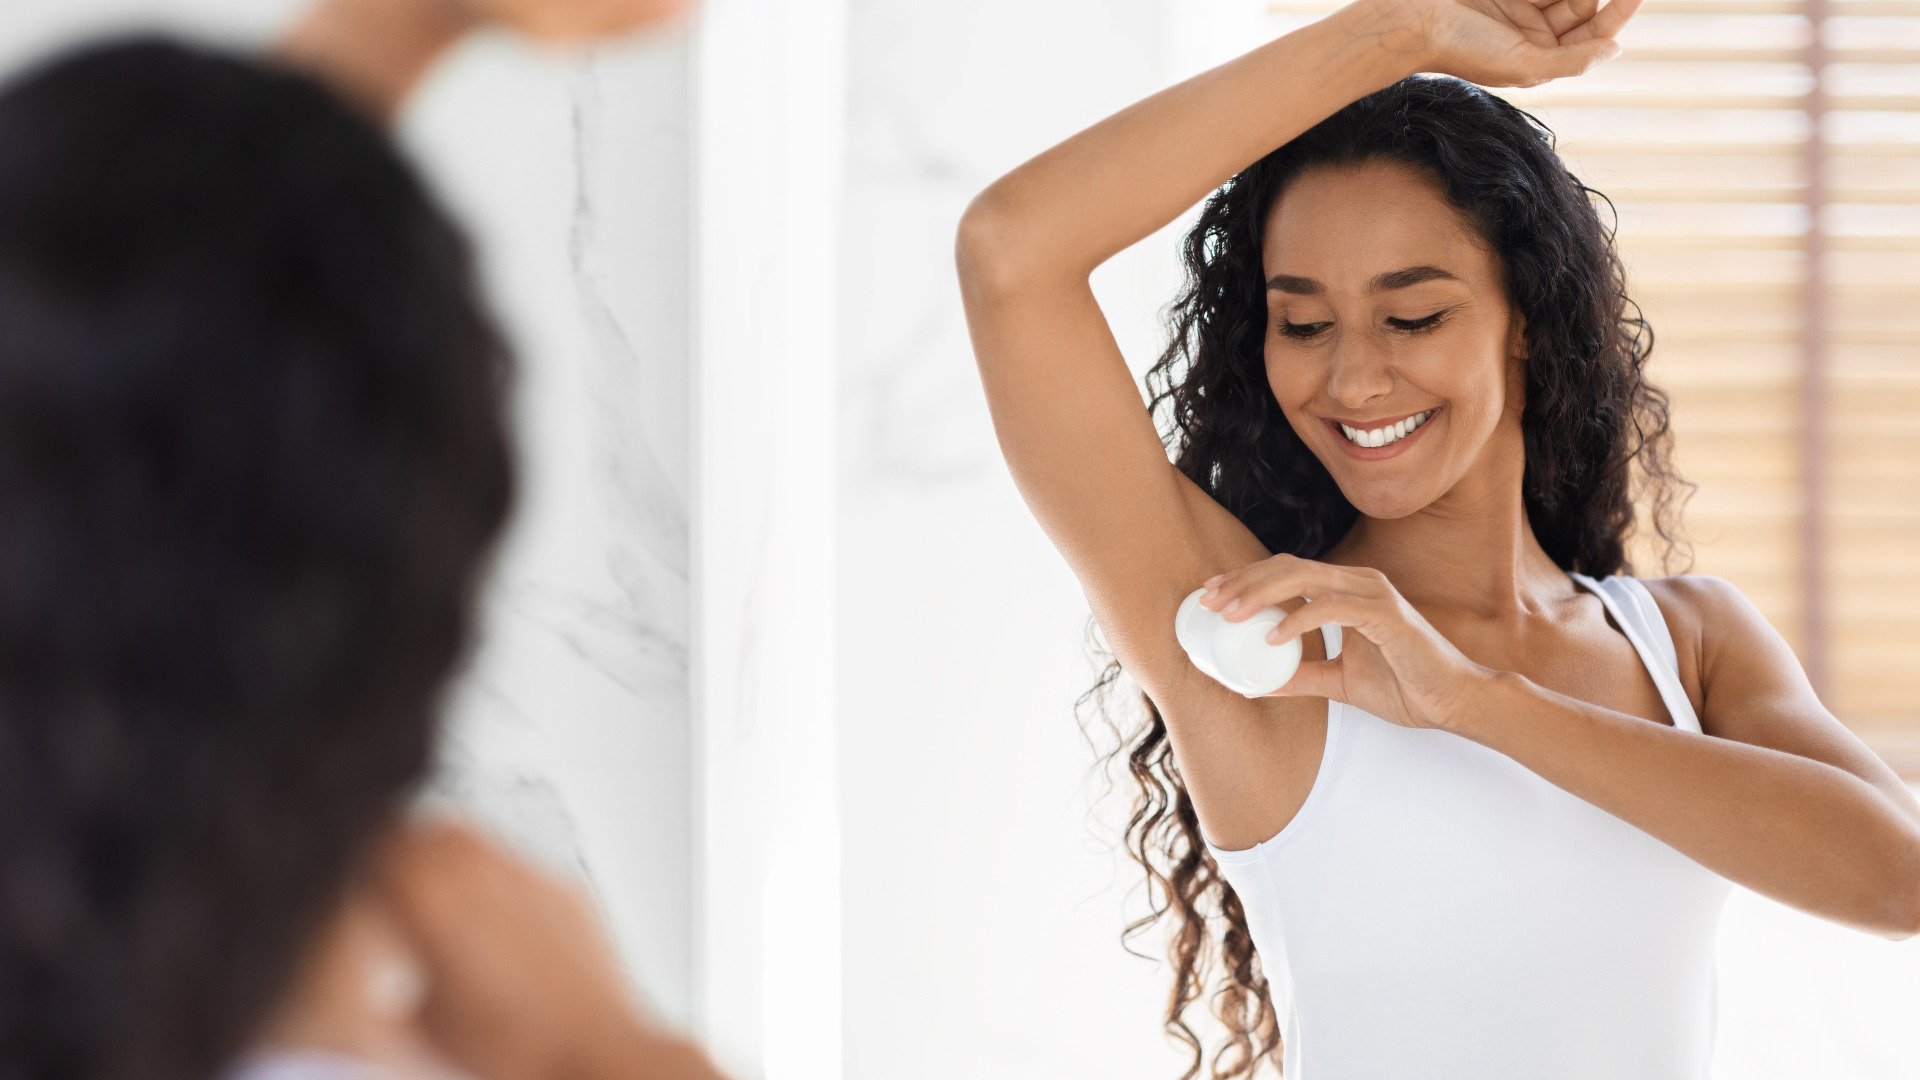 Non Toxic and Natural Deodorant Brands That Actually Work